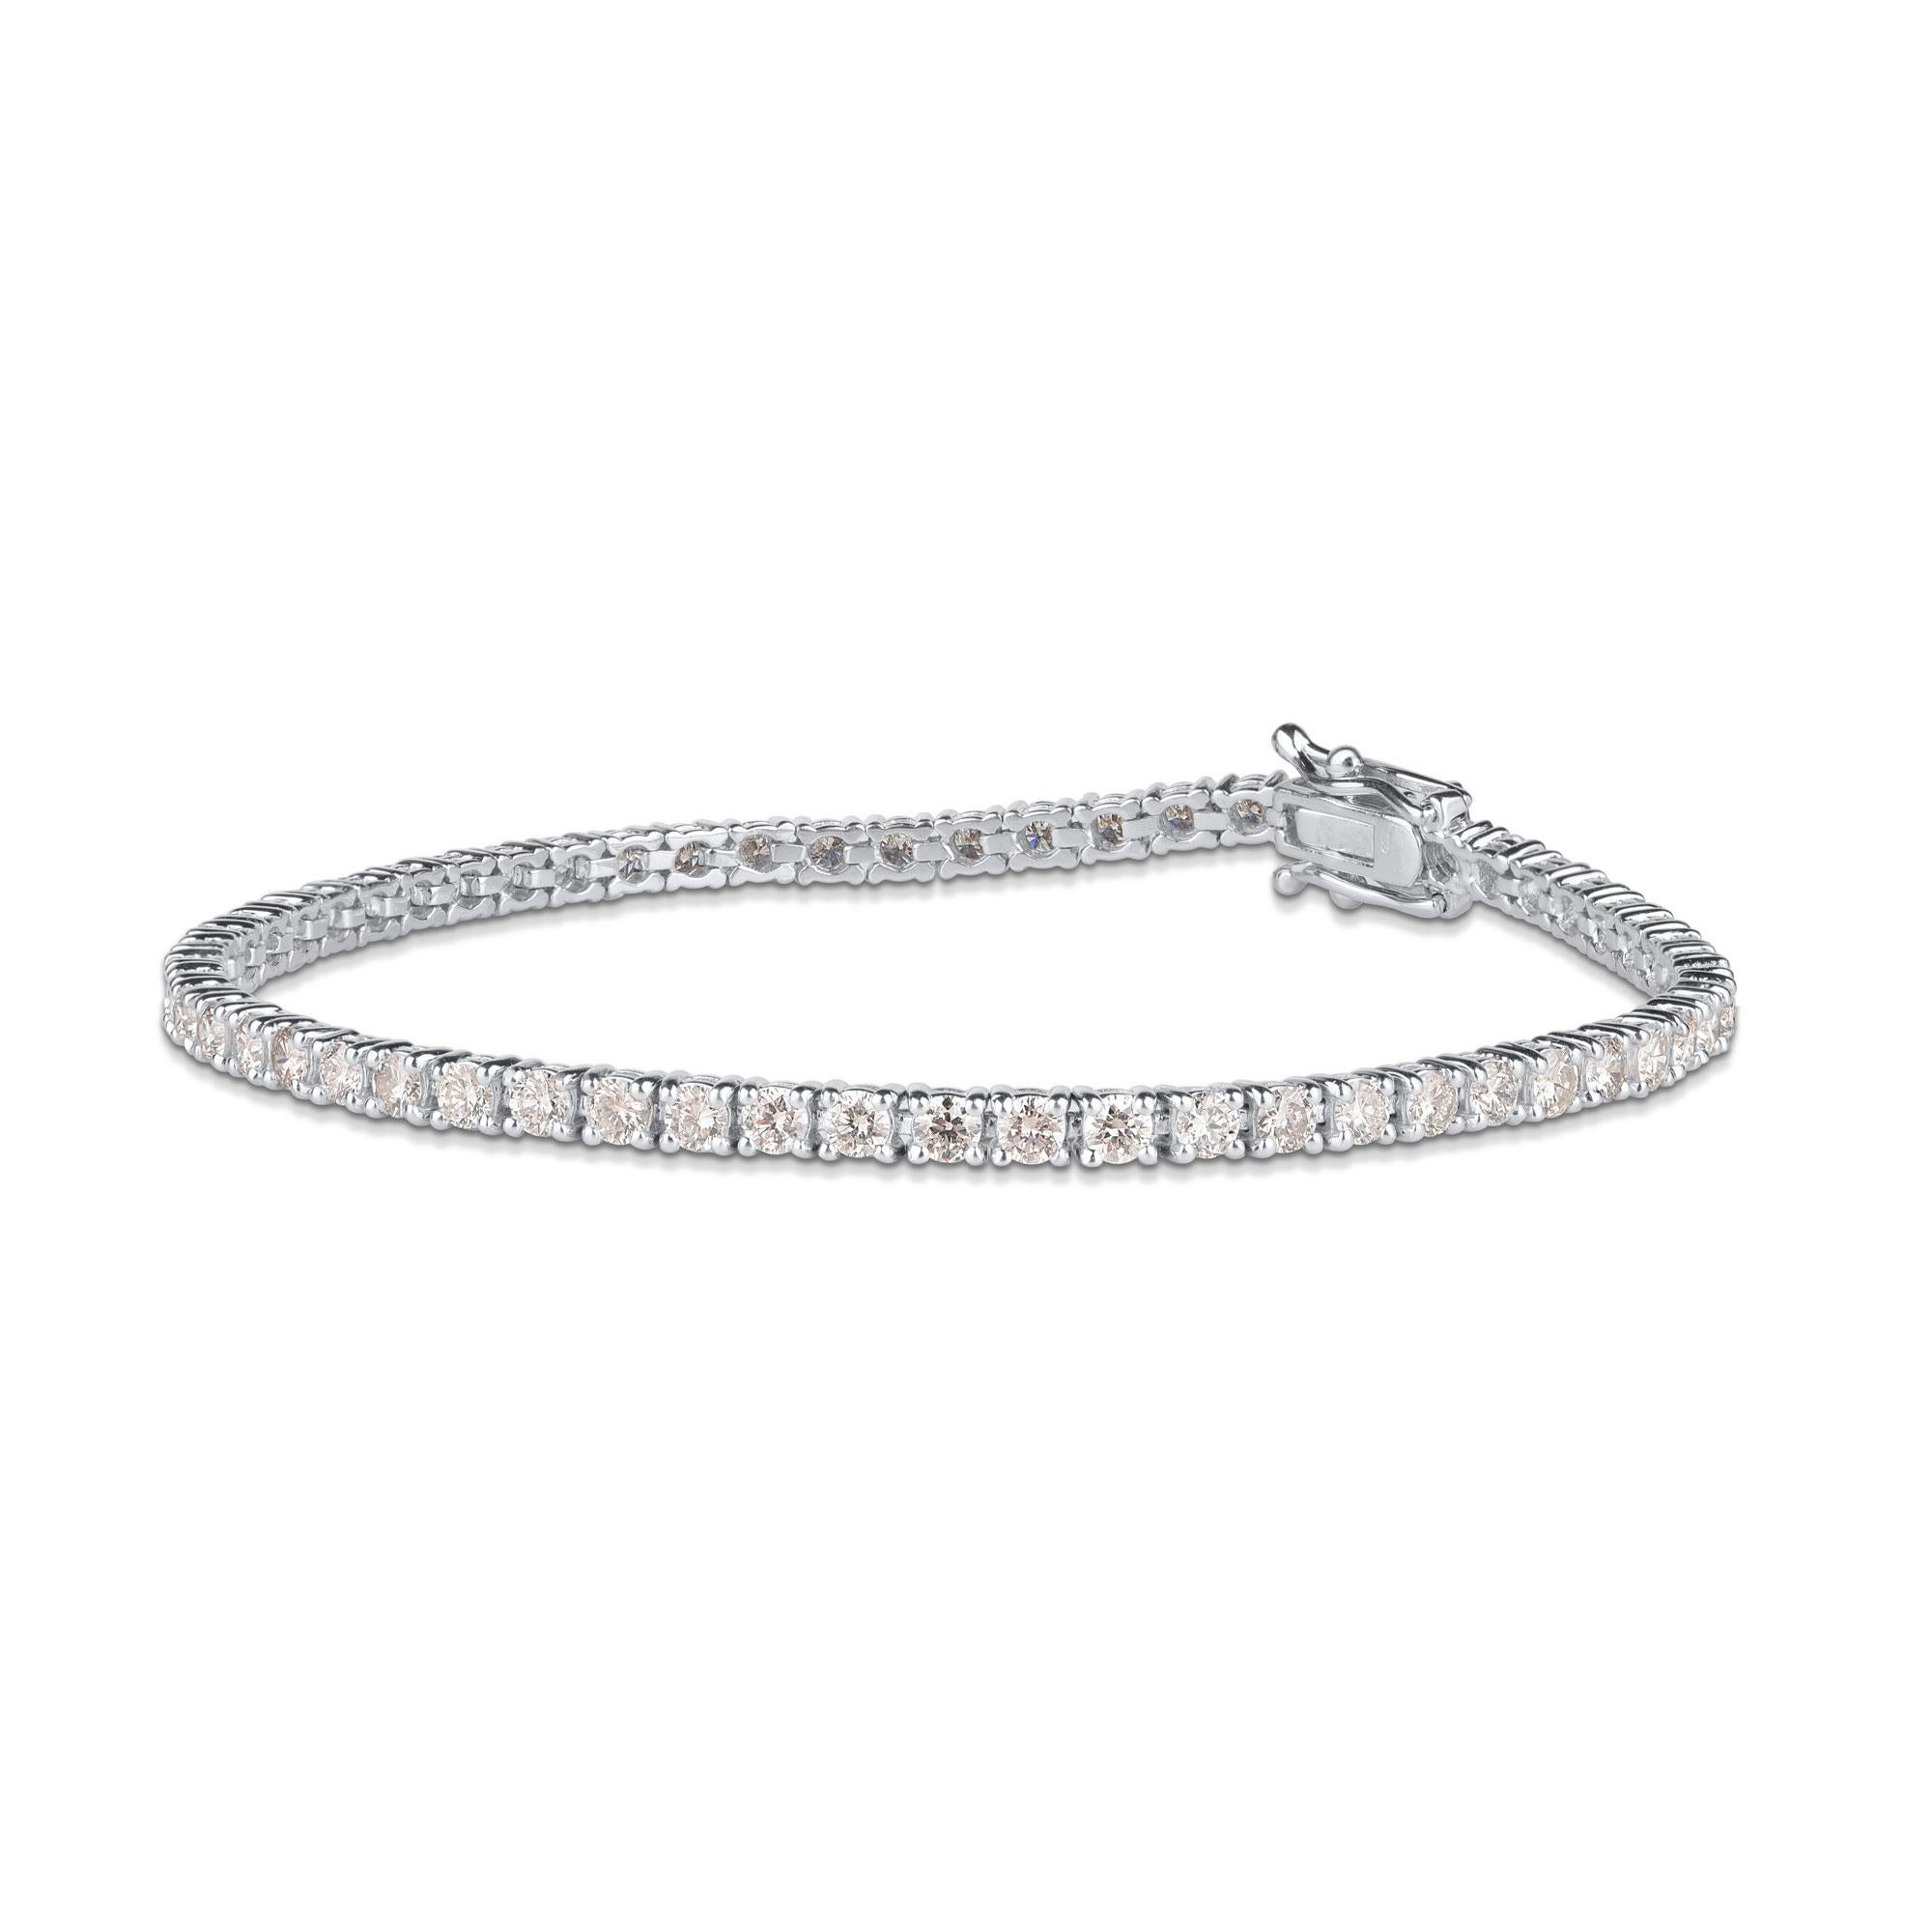 Embedded with 59 round-cut diamonds and crafted by our in-house experts in 18 KT White Gold. Diamonds are graded GH color, SI2 clarity.  This diamond bracelet in white gold is a classic accessory, perfect for daily wear.  